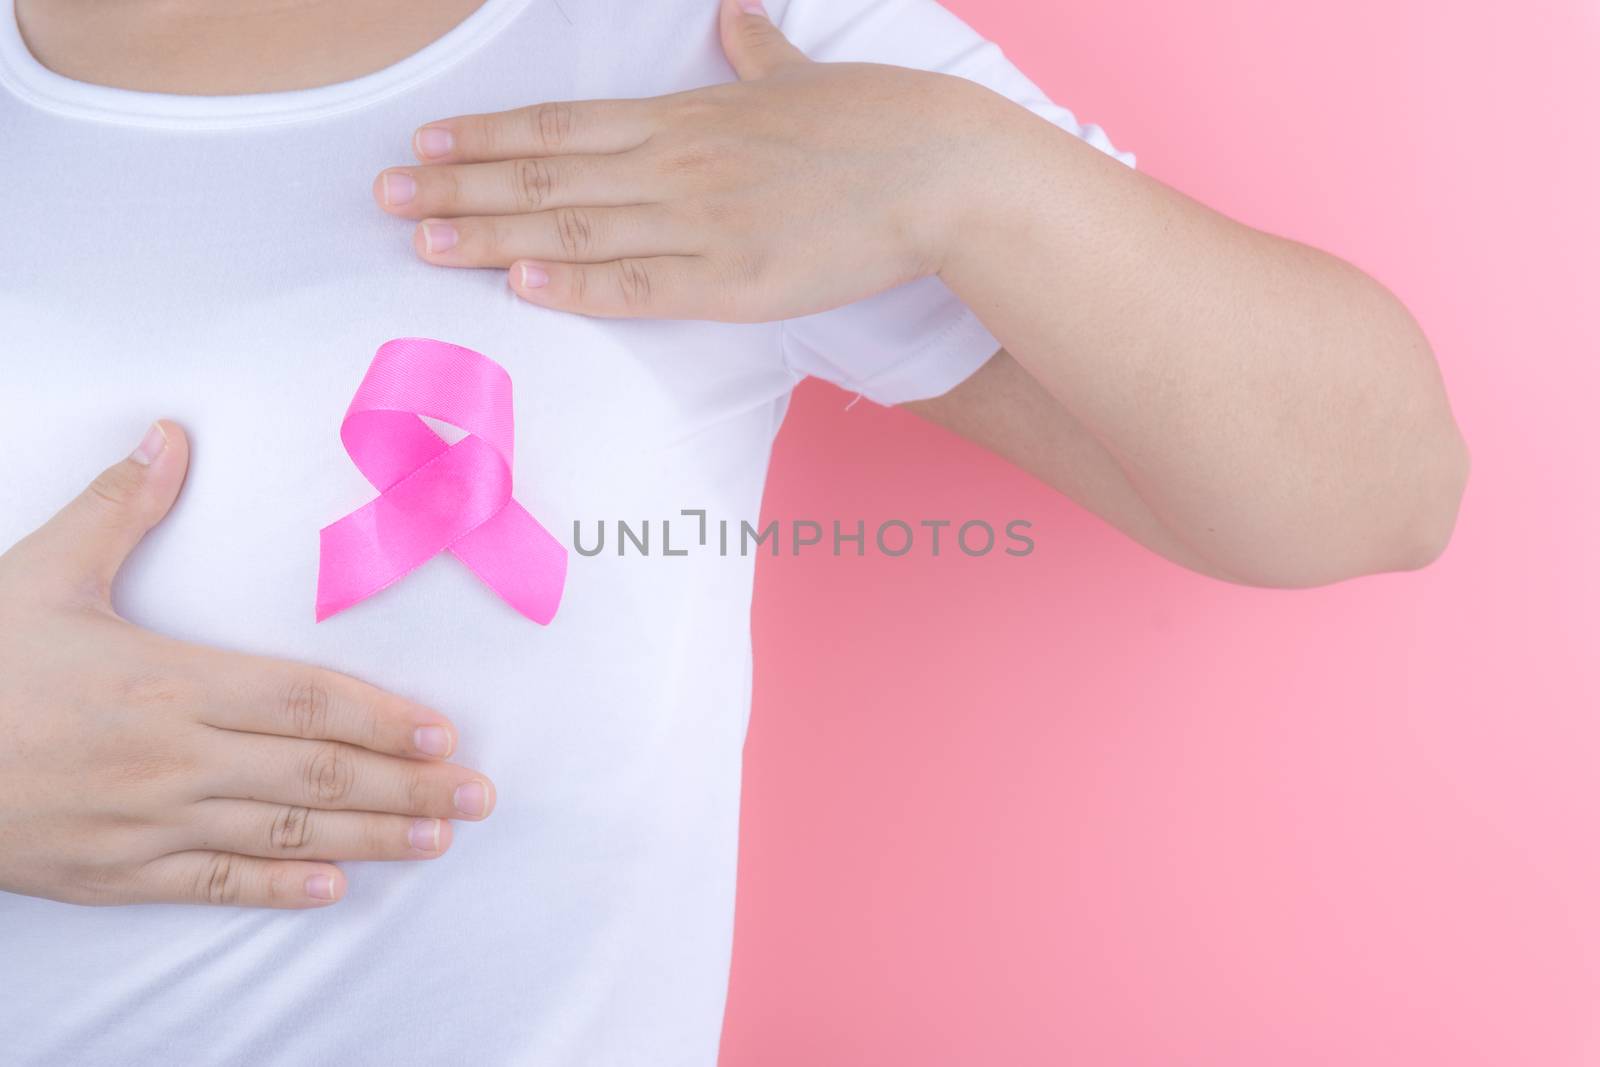 Healthcare, medicine and breast cancer awareness concept. Closeup on woman chest with pink breast cancer awareness ribbon.